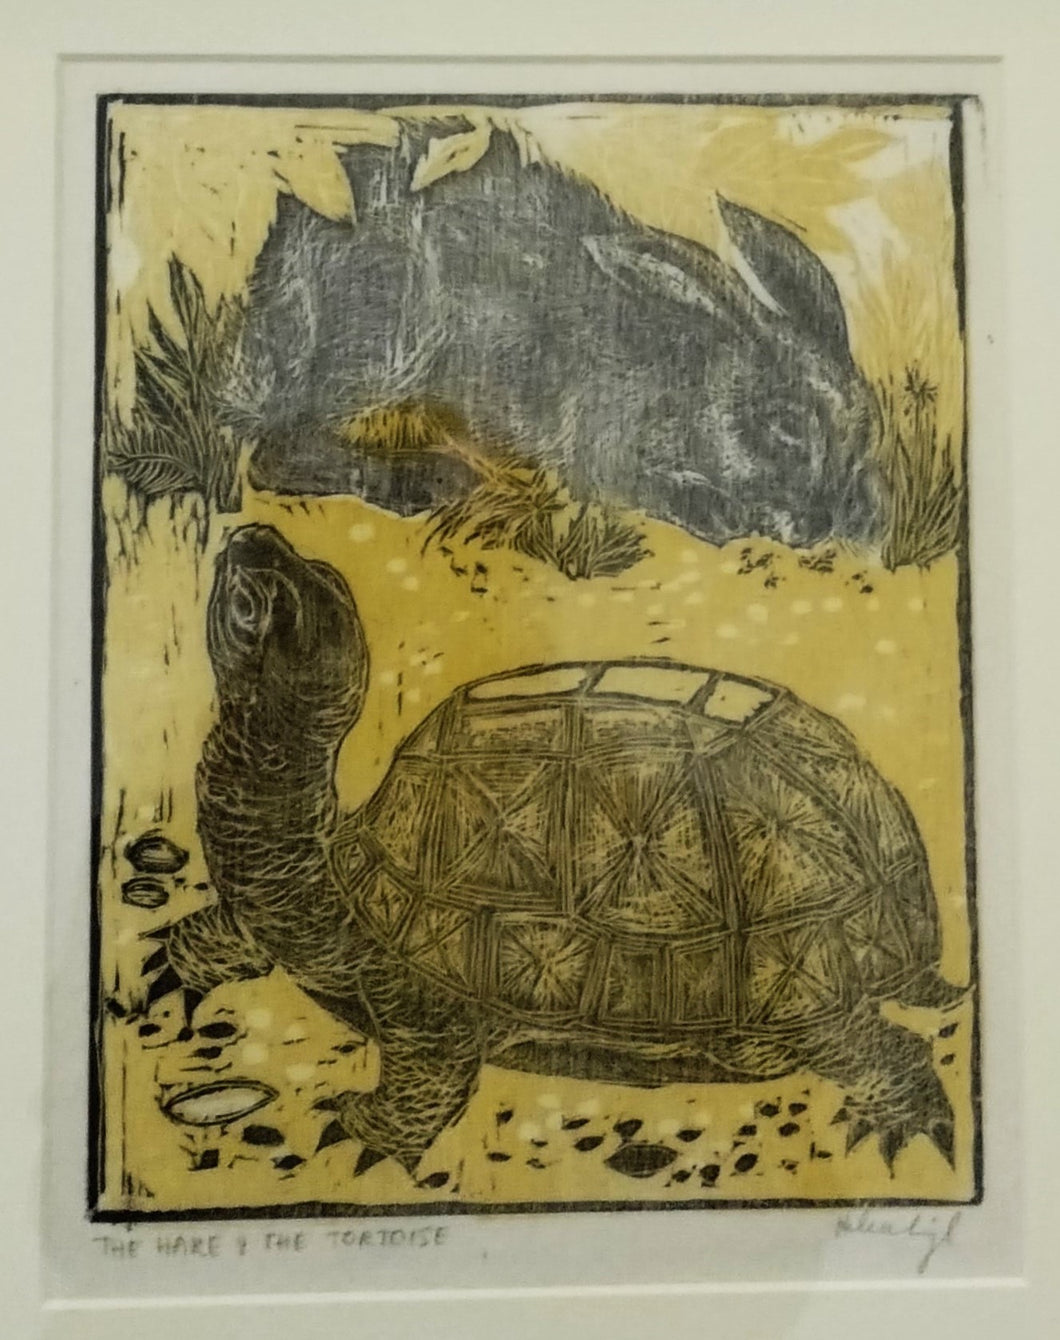 The Hare & the Tortoise by Helen Siegl